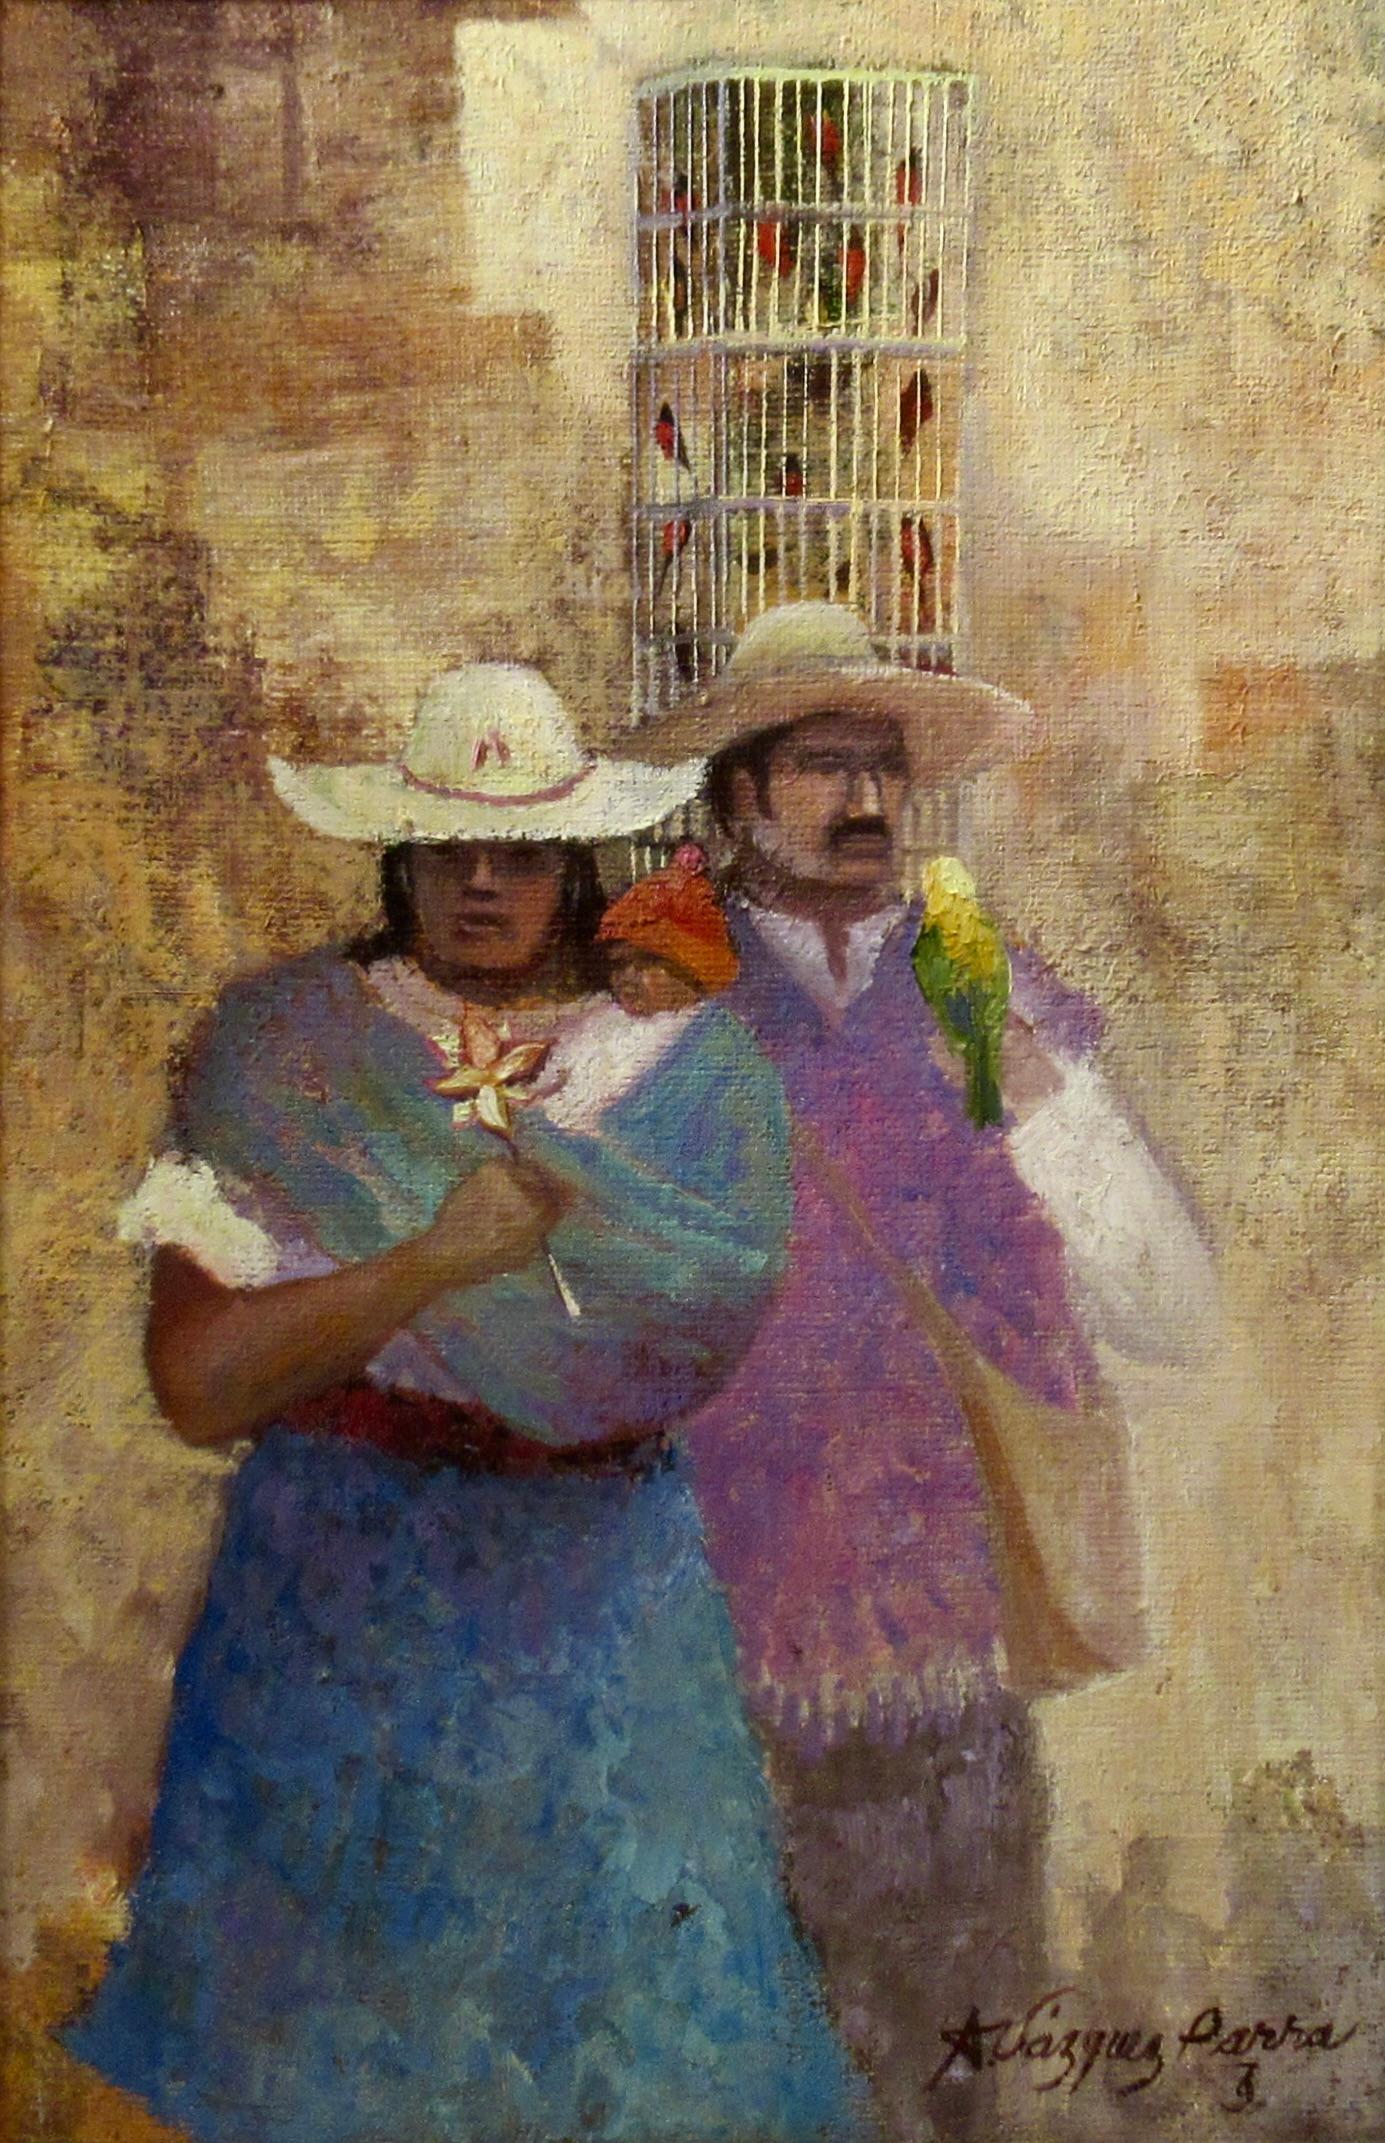 Mexican Couple with Baby and Birds Cage - Painting by Antonio Vasquez Parra